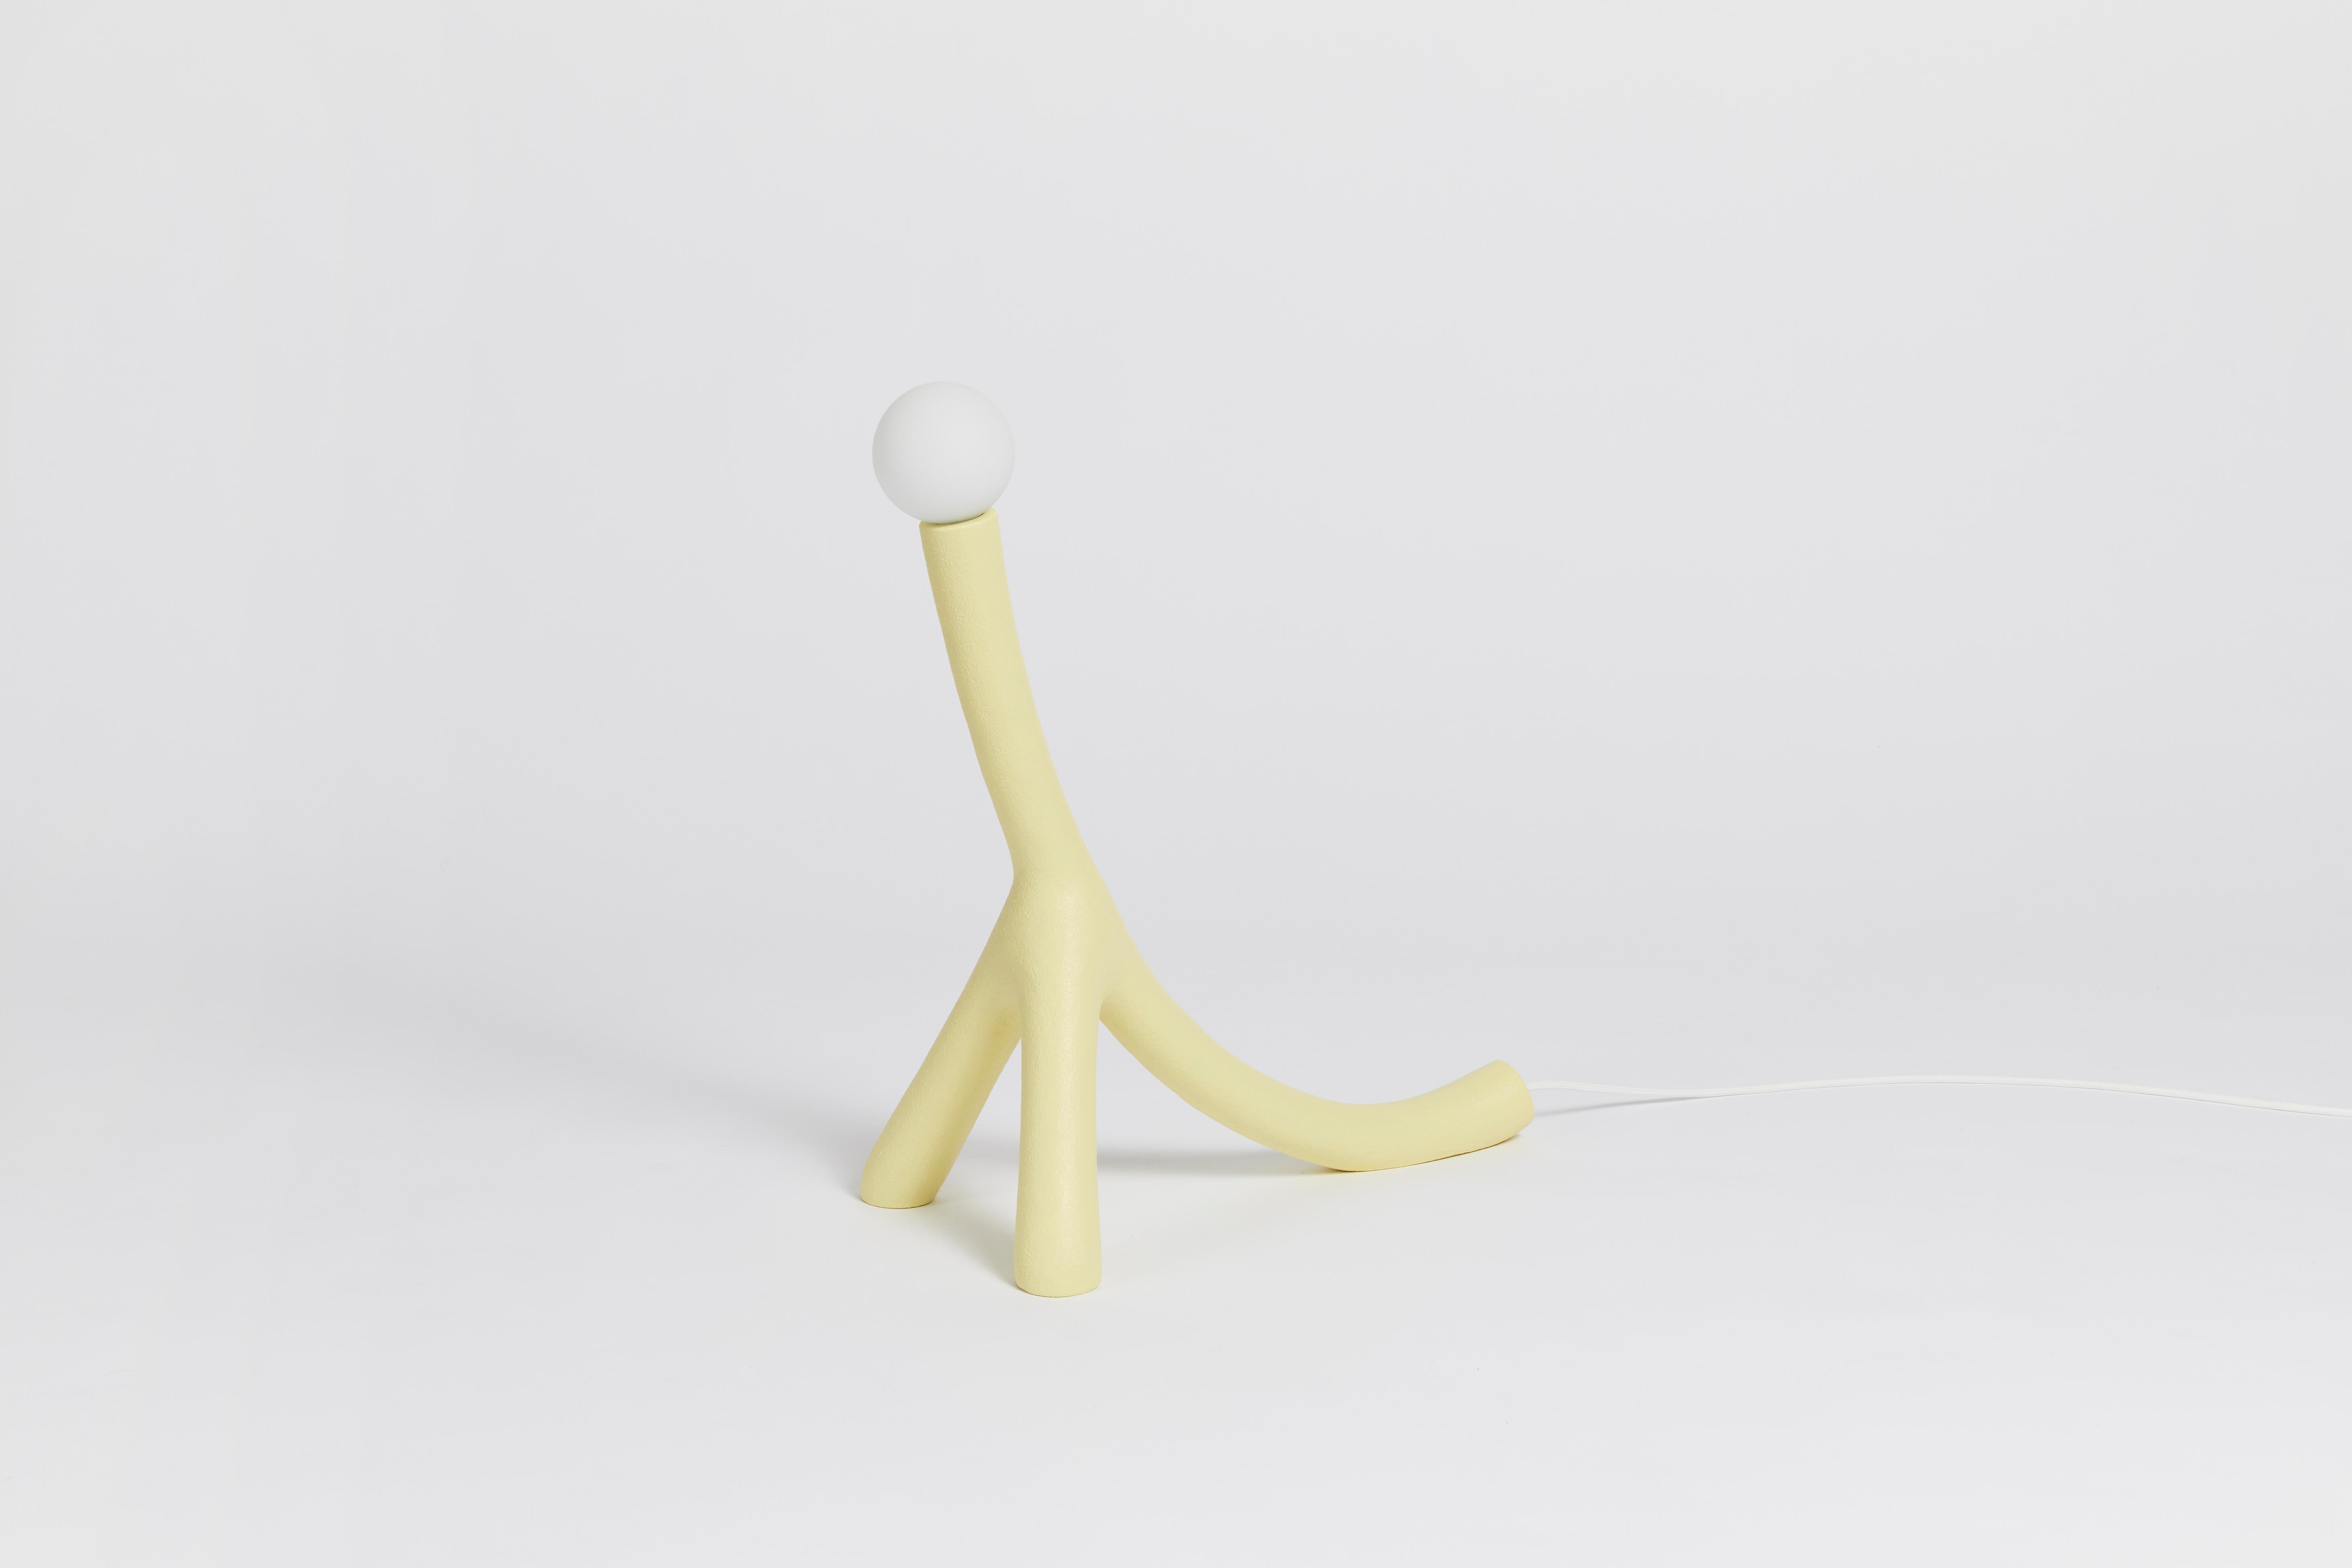 Play Object desk light 01 by Hot Wire Extensions
Limited Edition
Materials: Waste SLS 3D nylon powder, Sand from sustainable sources
Dimensions: L 48 x W 27 x H 57 cm 
Colour: Anthracite, Aqua, Cream, Lemon, Pink and Grey
Finish: Matte, Sealed